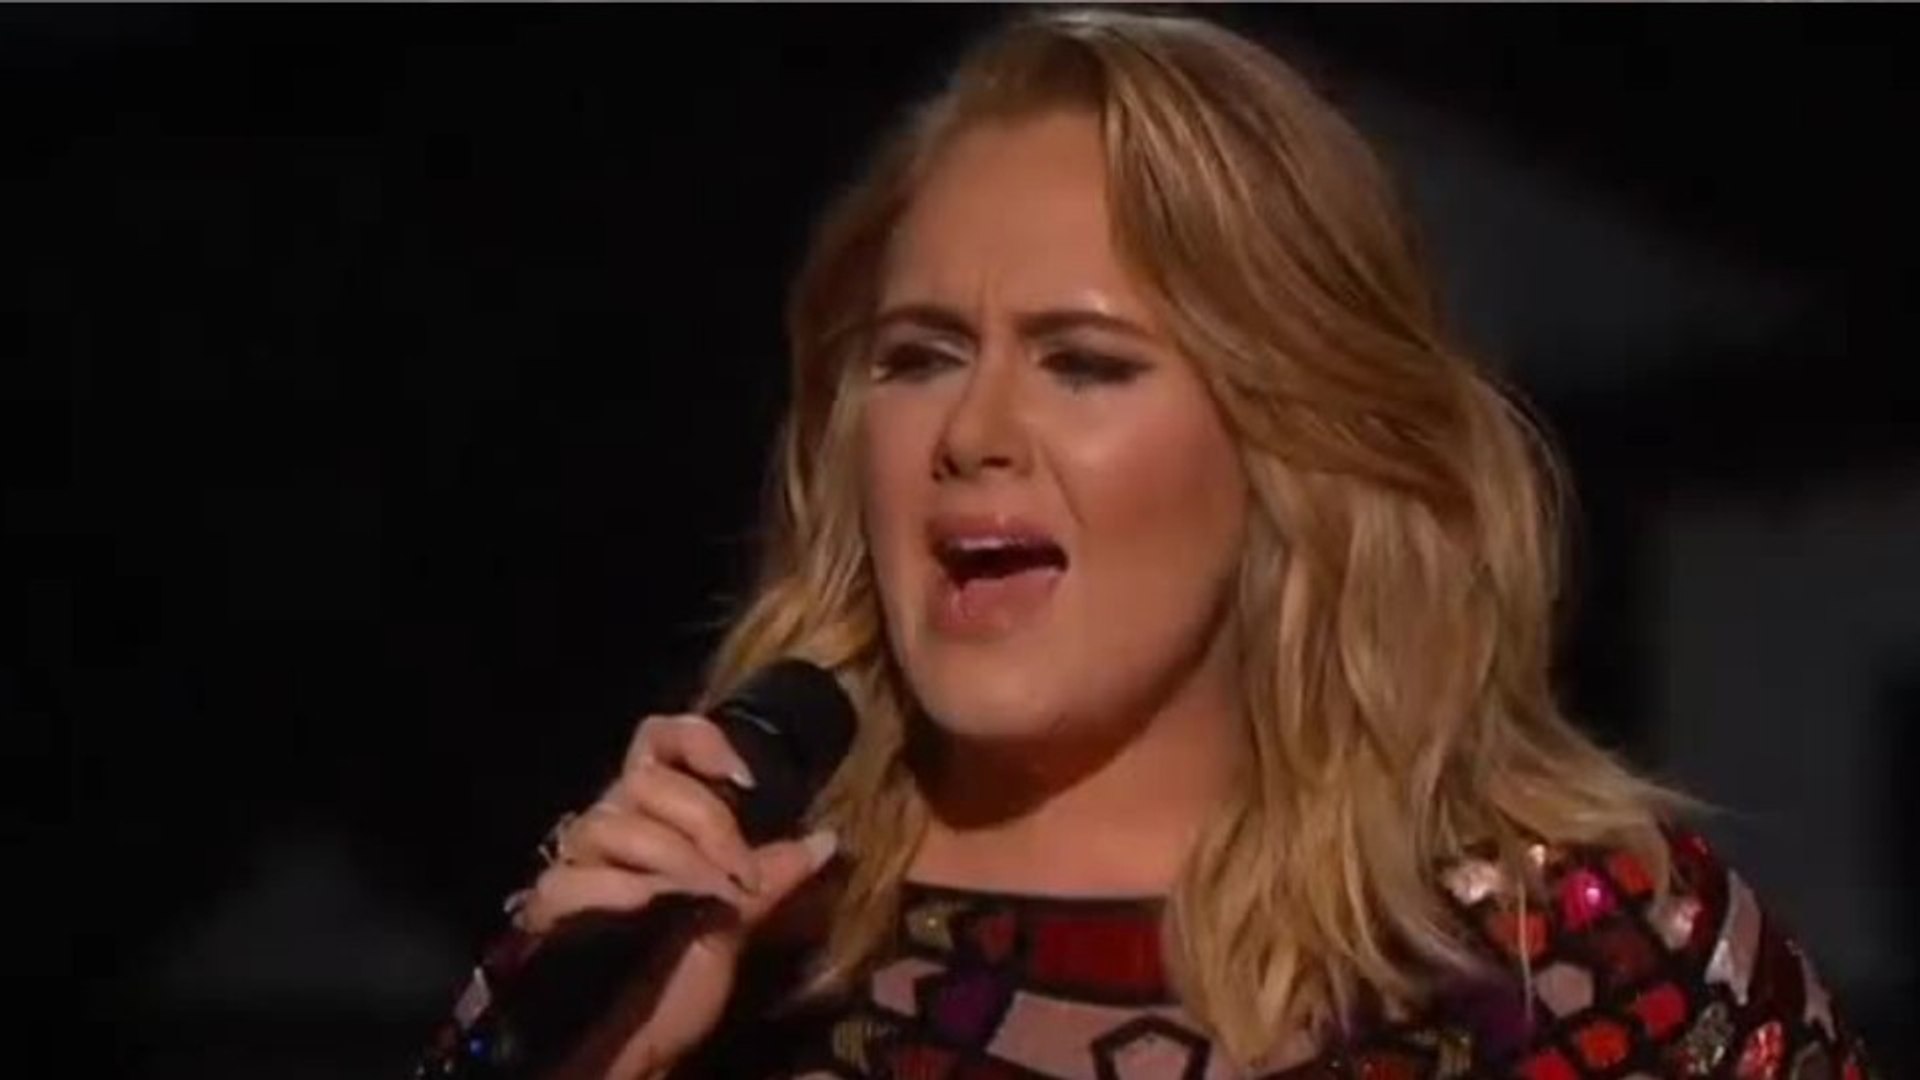 Adele Says 'Hello' With Opening Performance at Grammys